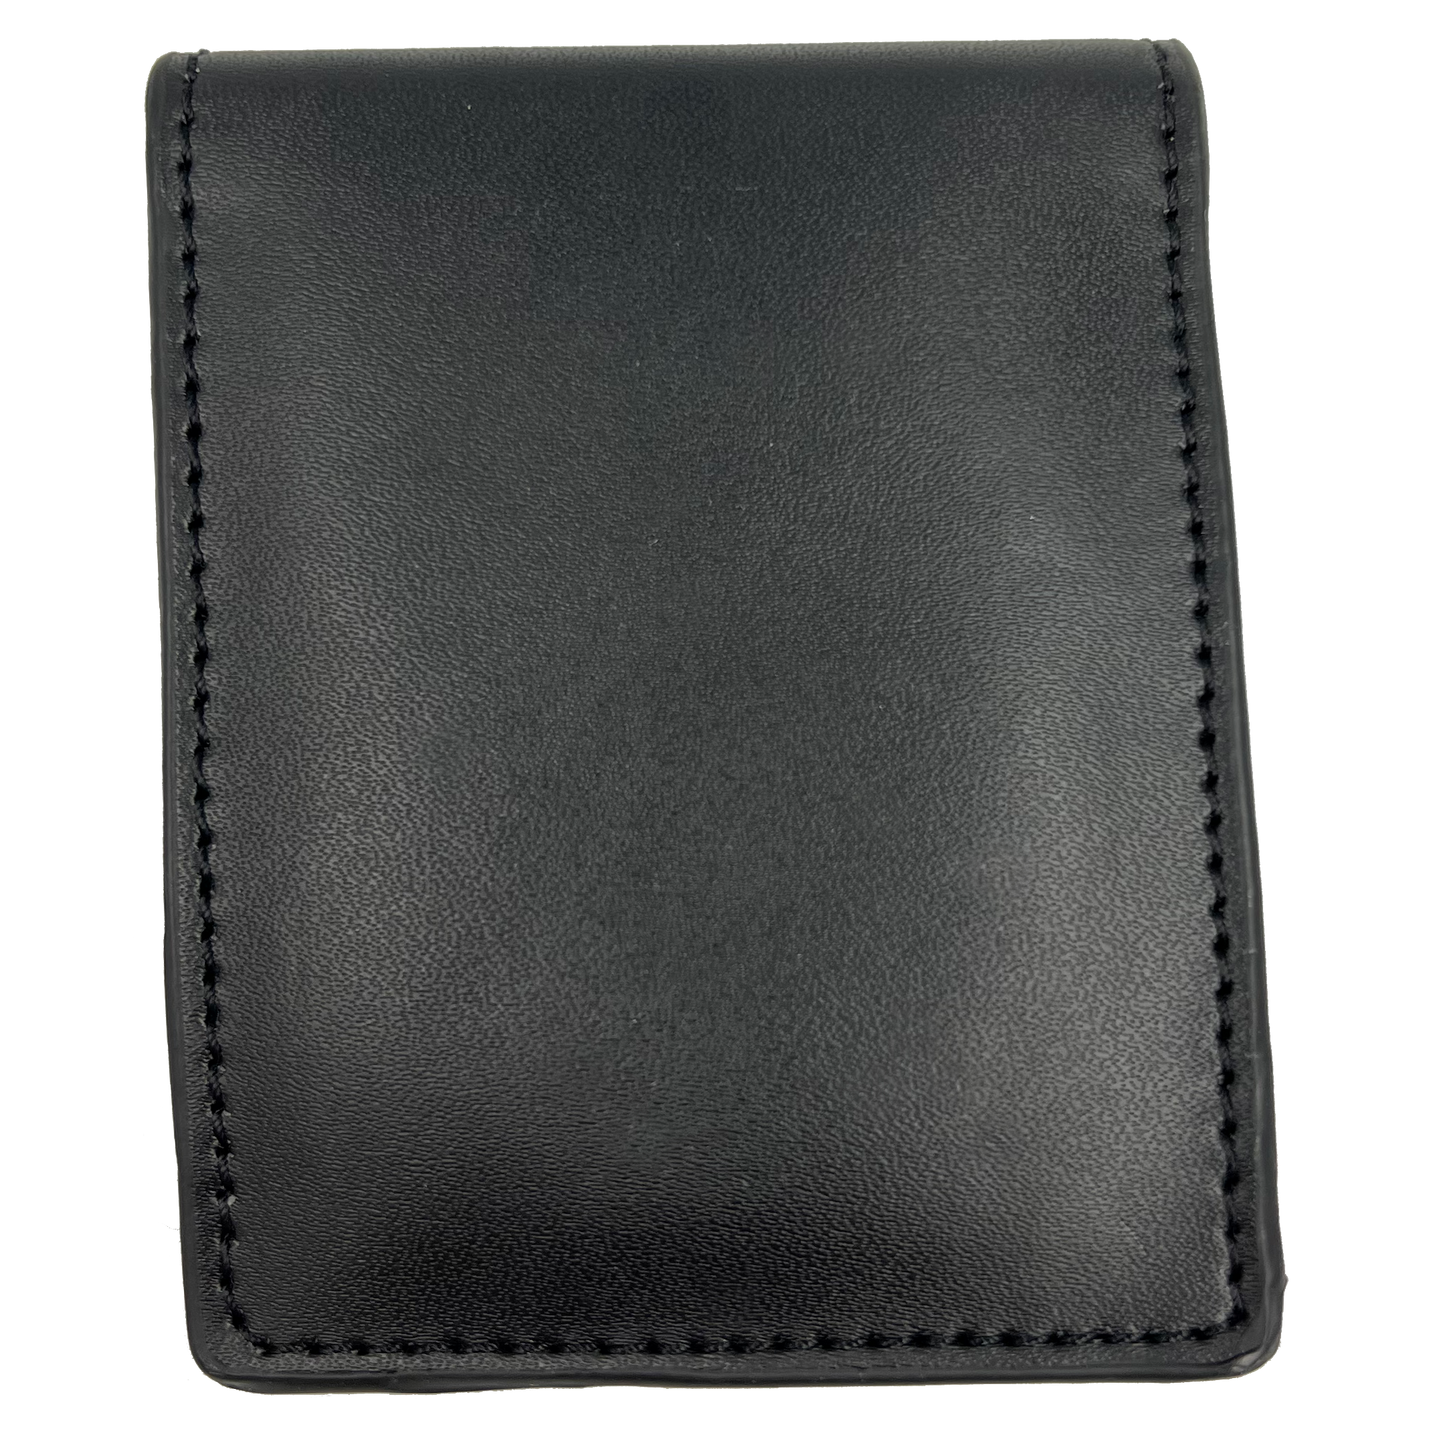 BL2-012B Large 2.75 inch full size Executive Protection wallet